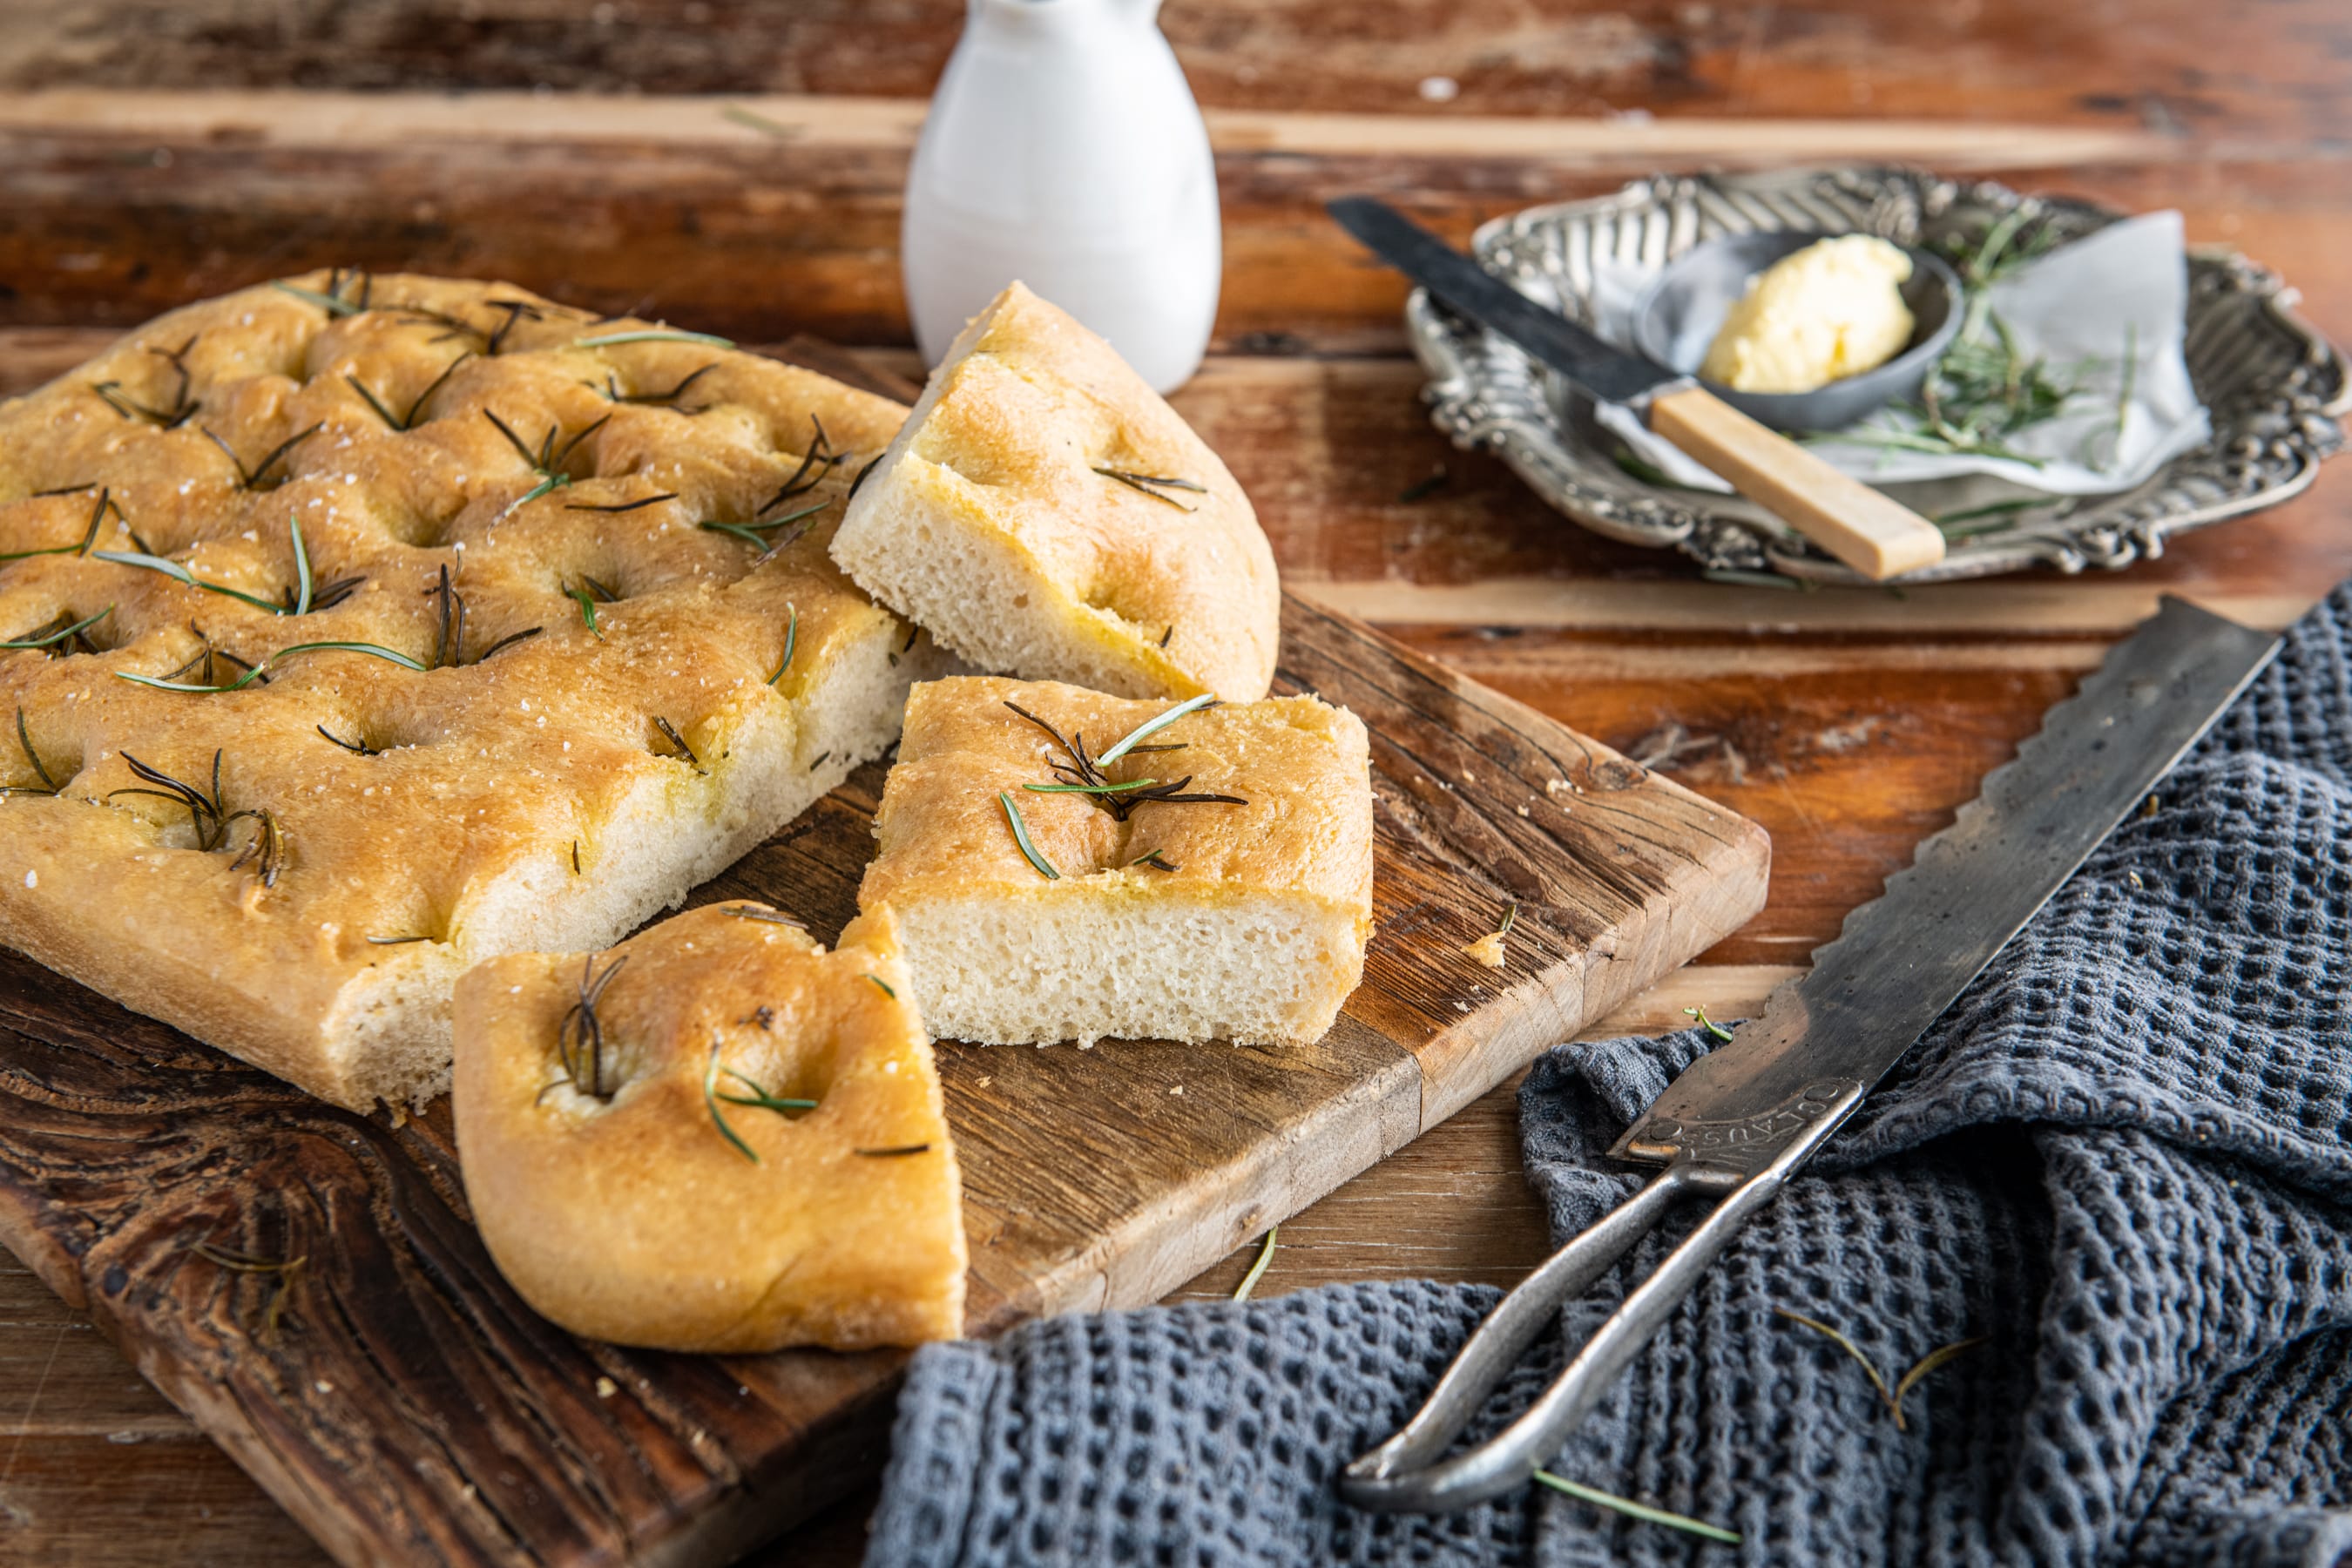 Baked and sliced focaccia with a side plate of butter and rosemary.